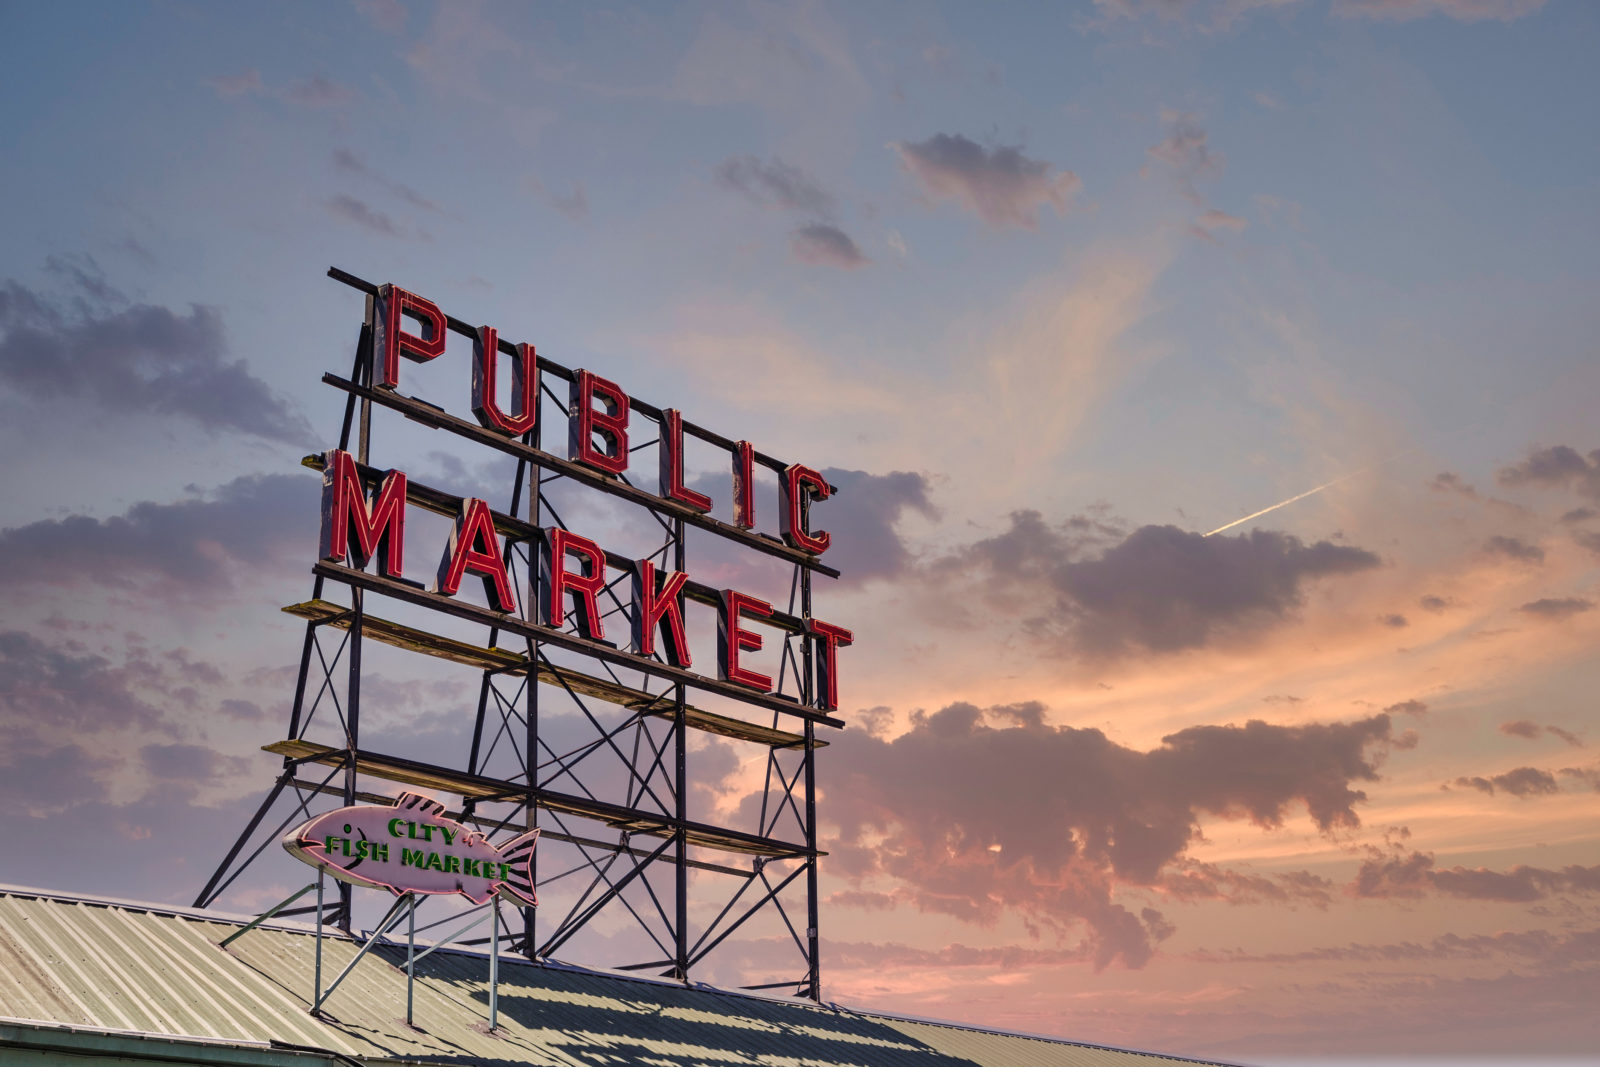 Neon Sign for Public Market in Seattle